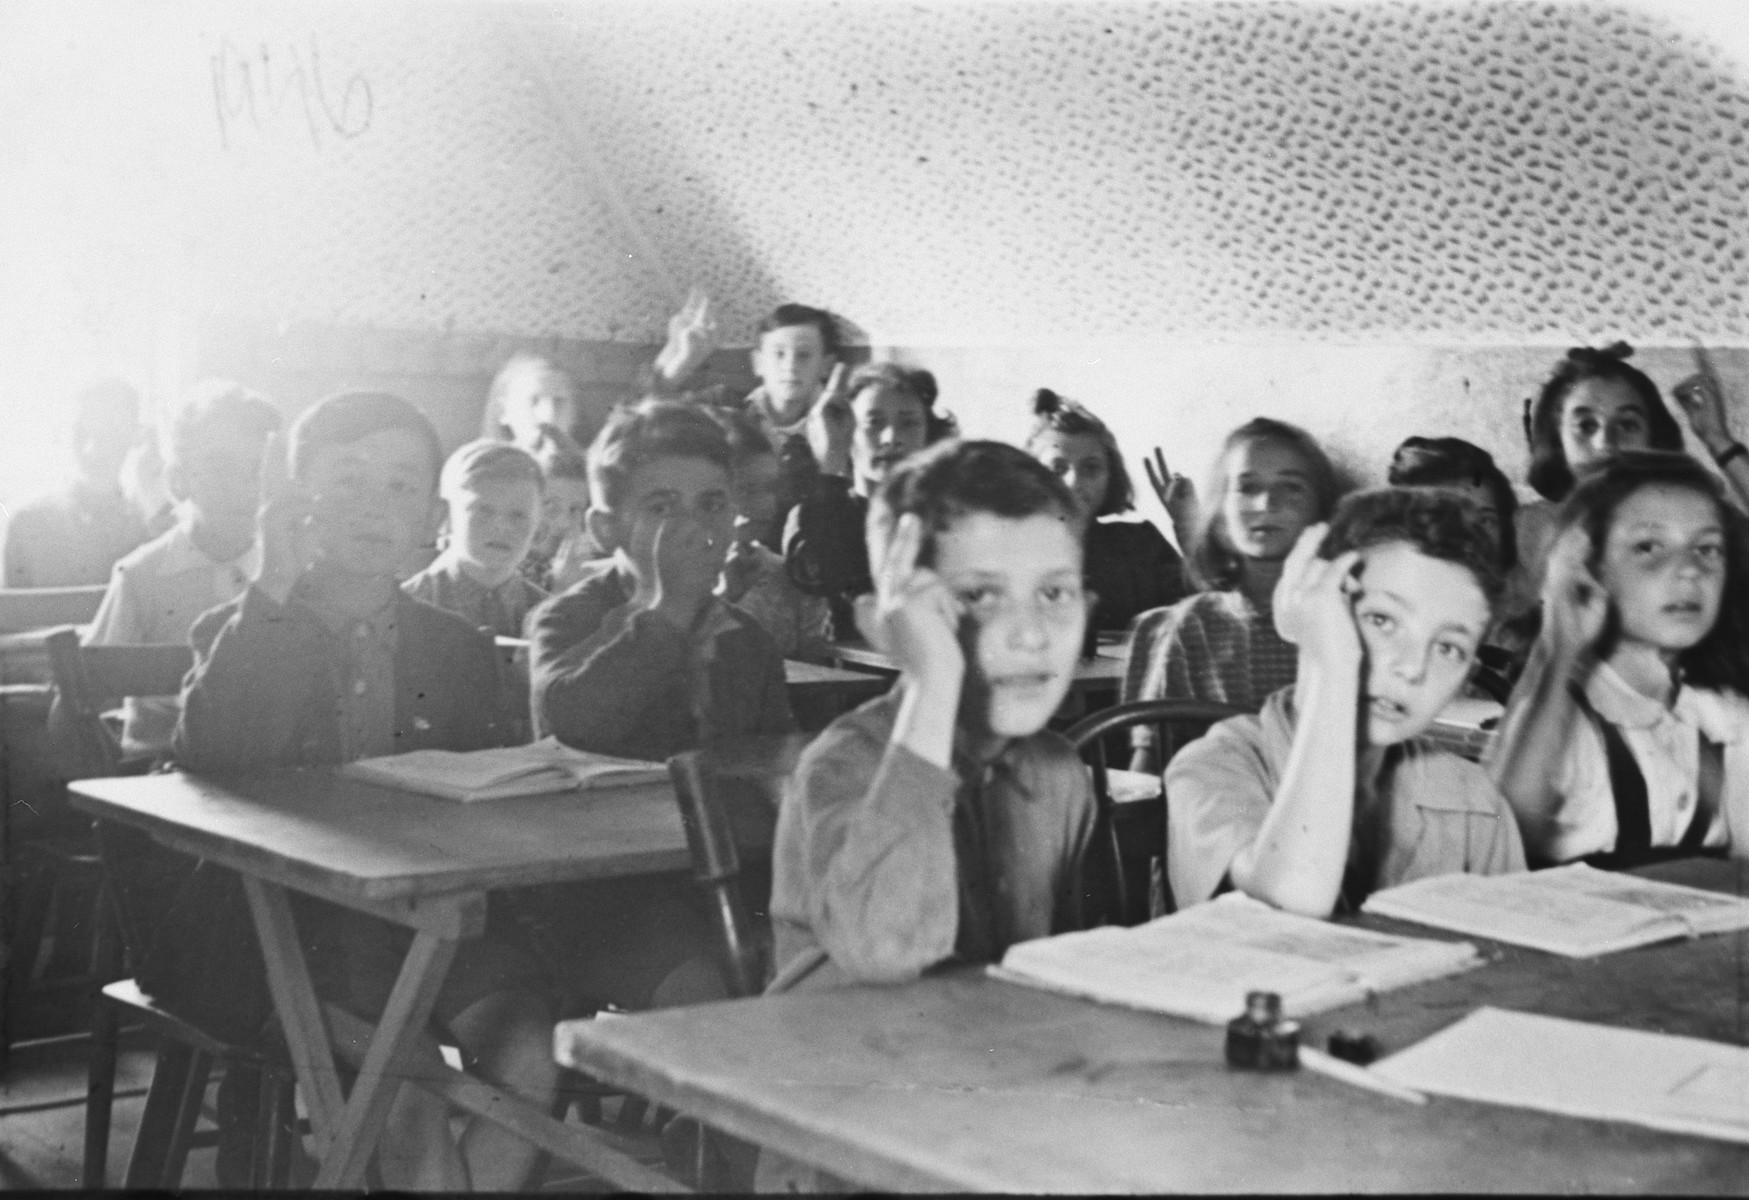 Children sit at their desks and raise their hands in a school in the Suttgart displaced persons' camp.

Lova Warszawczyk is pictured in the second row, on the left.